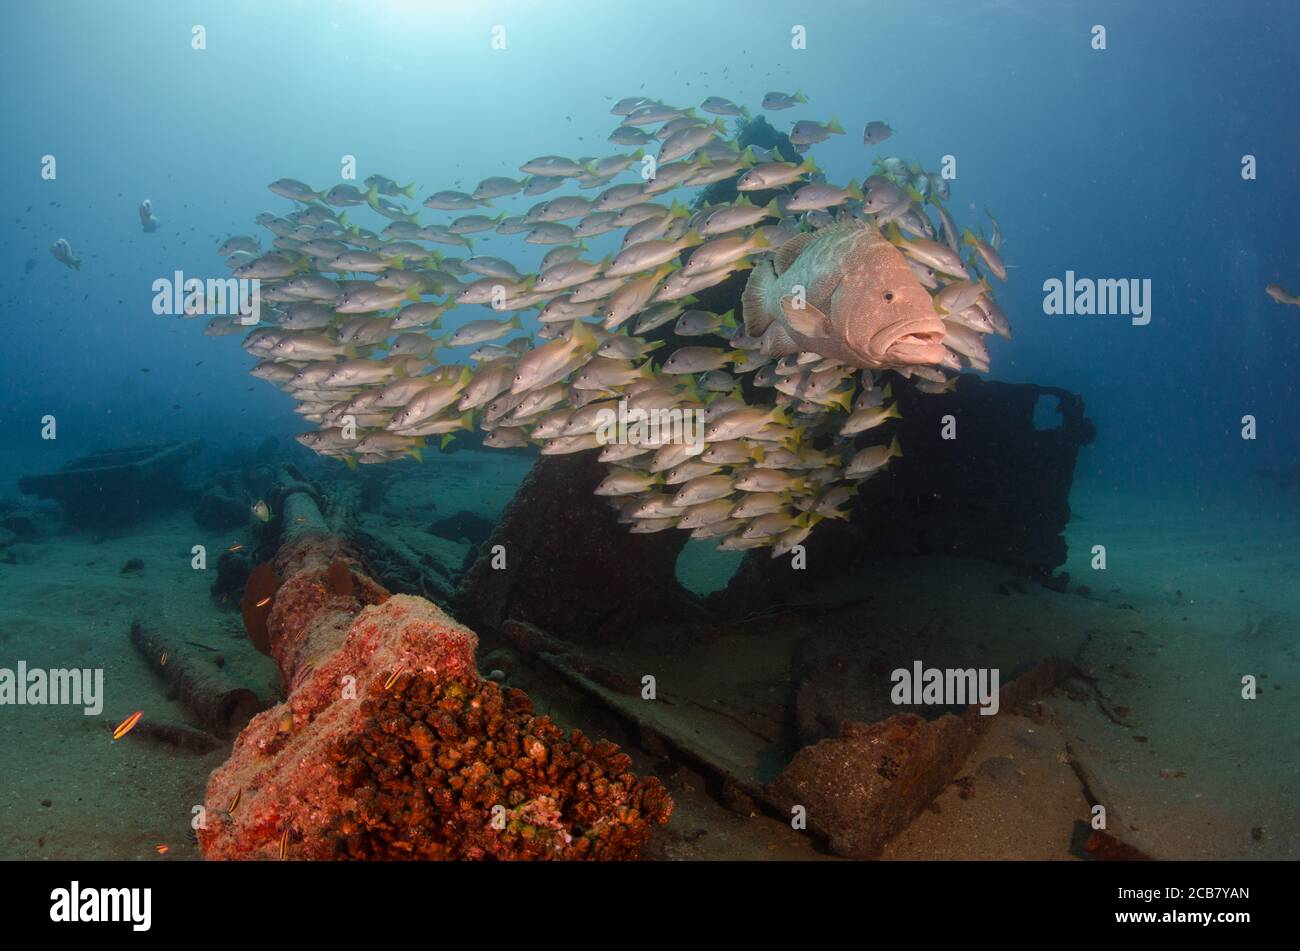 Groupers feeding from the reefs of the Sea of Cortez, Pacific ocean. Cabo Pulmo National Park, Baja California Sur, Mexico. Stock Photo